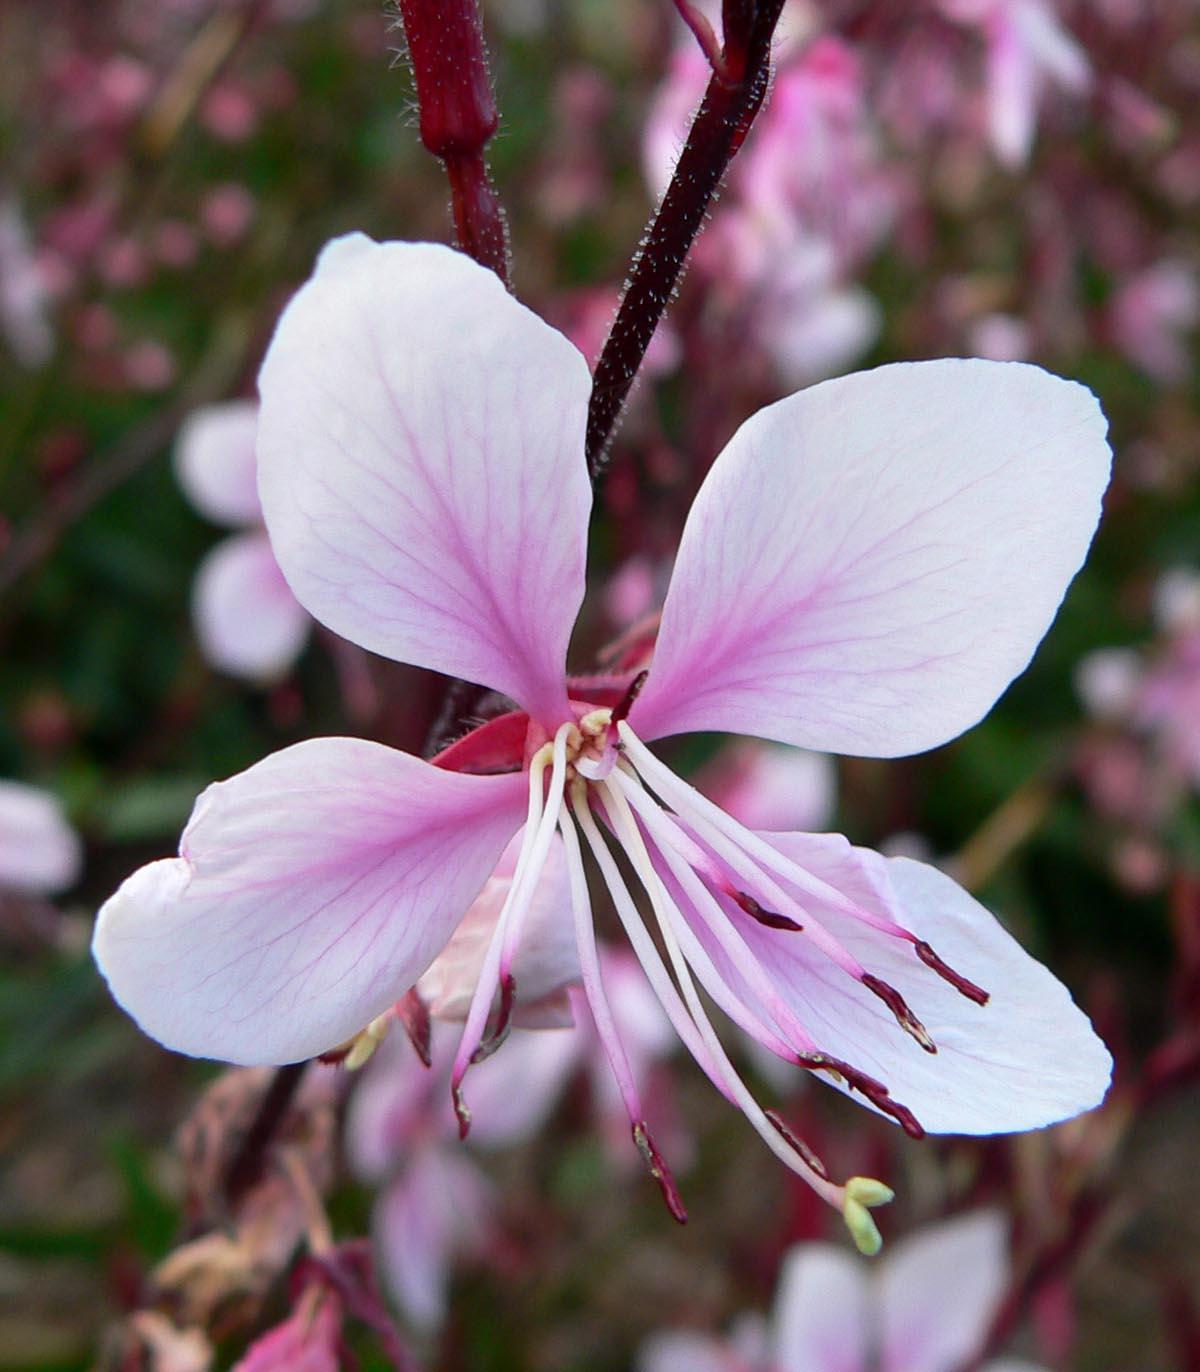 white-pink flowers with filaments, maroon anthers, light-green stigma and brown stems